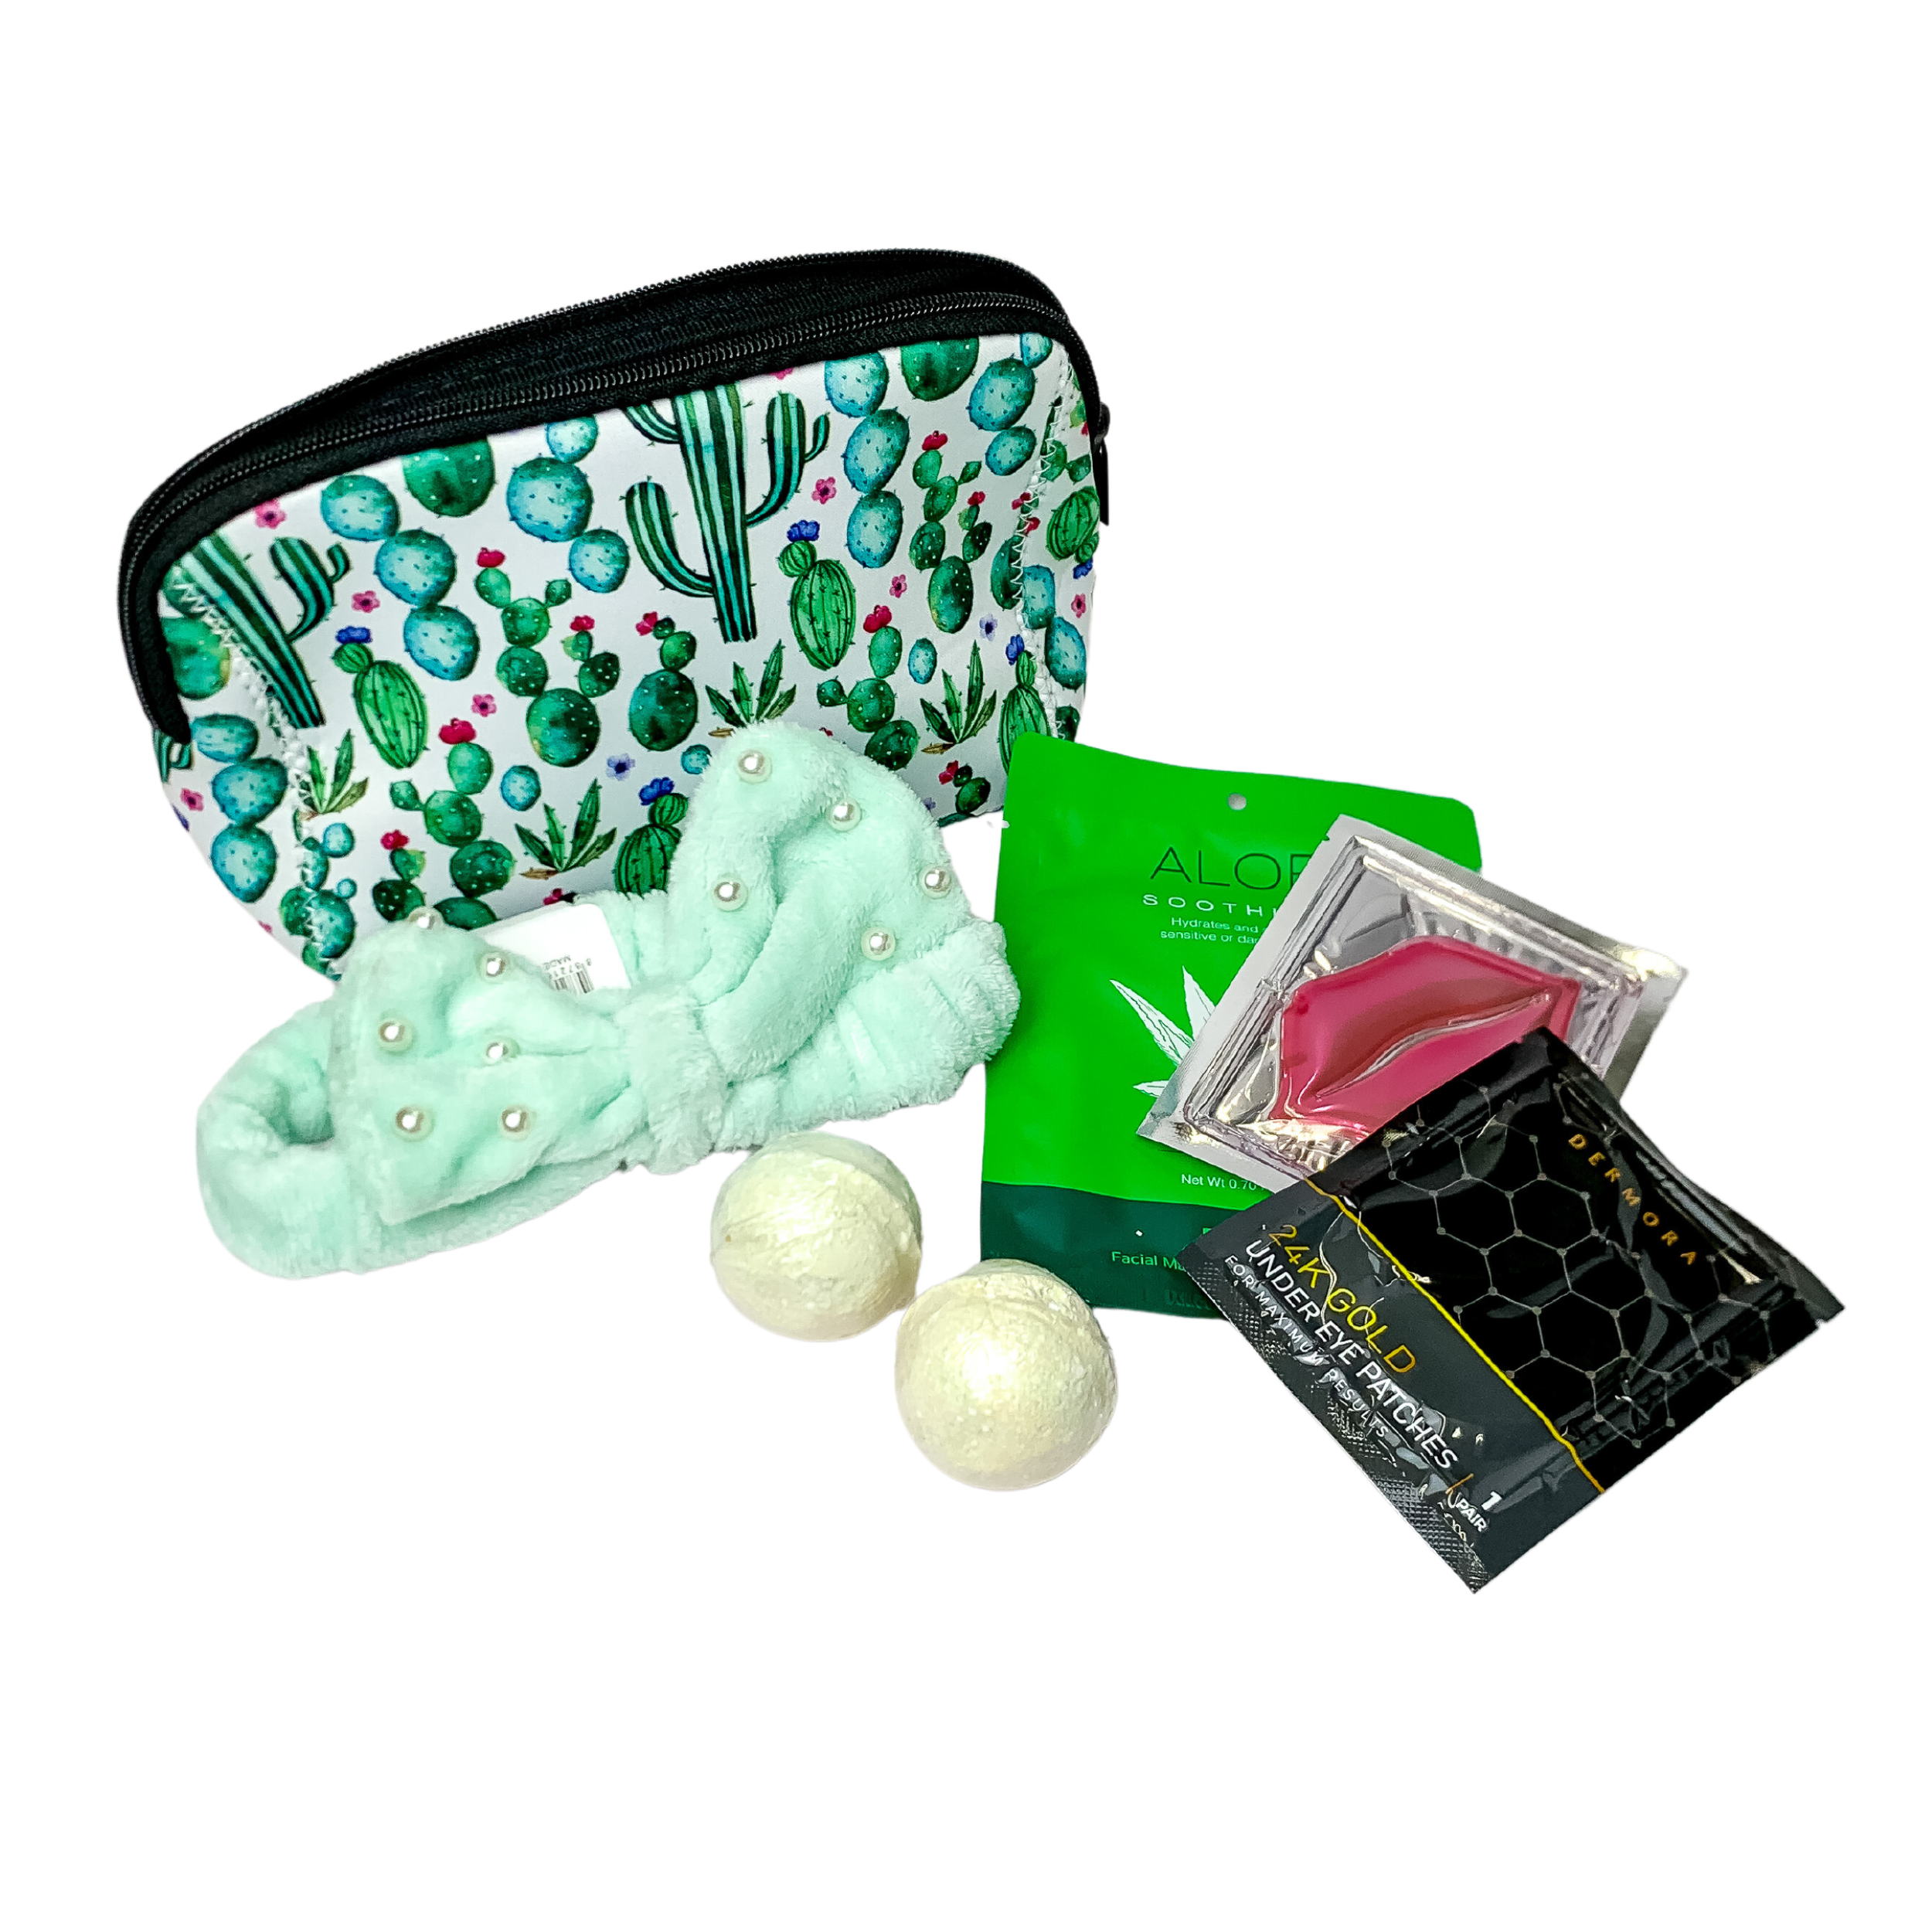 one neoprene makeup bag, one luxury head wrap with bow, facial mask treat, collagen eye treatment, lip mask and bath bombs